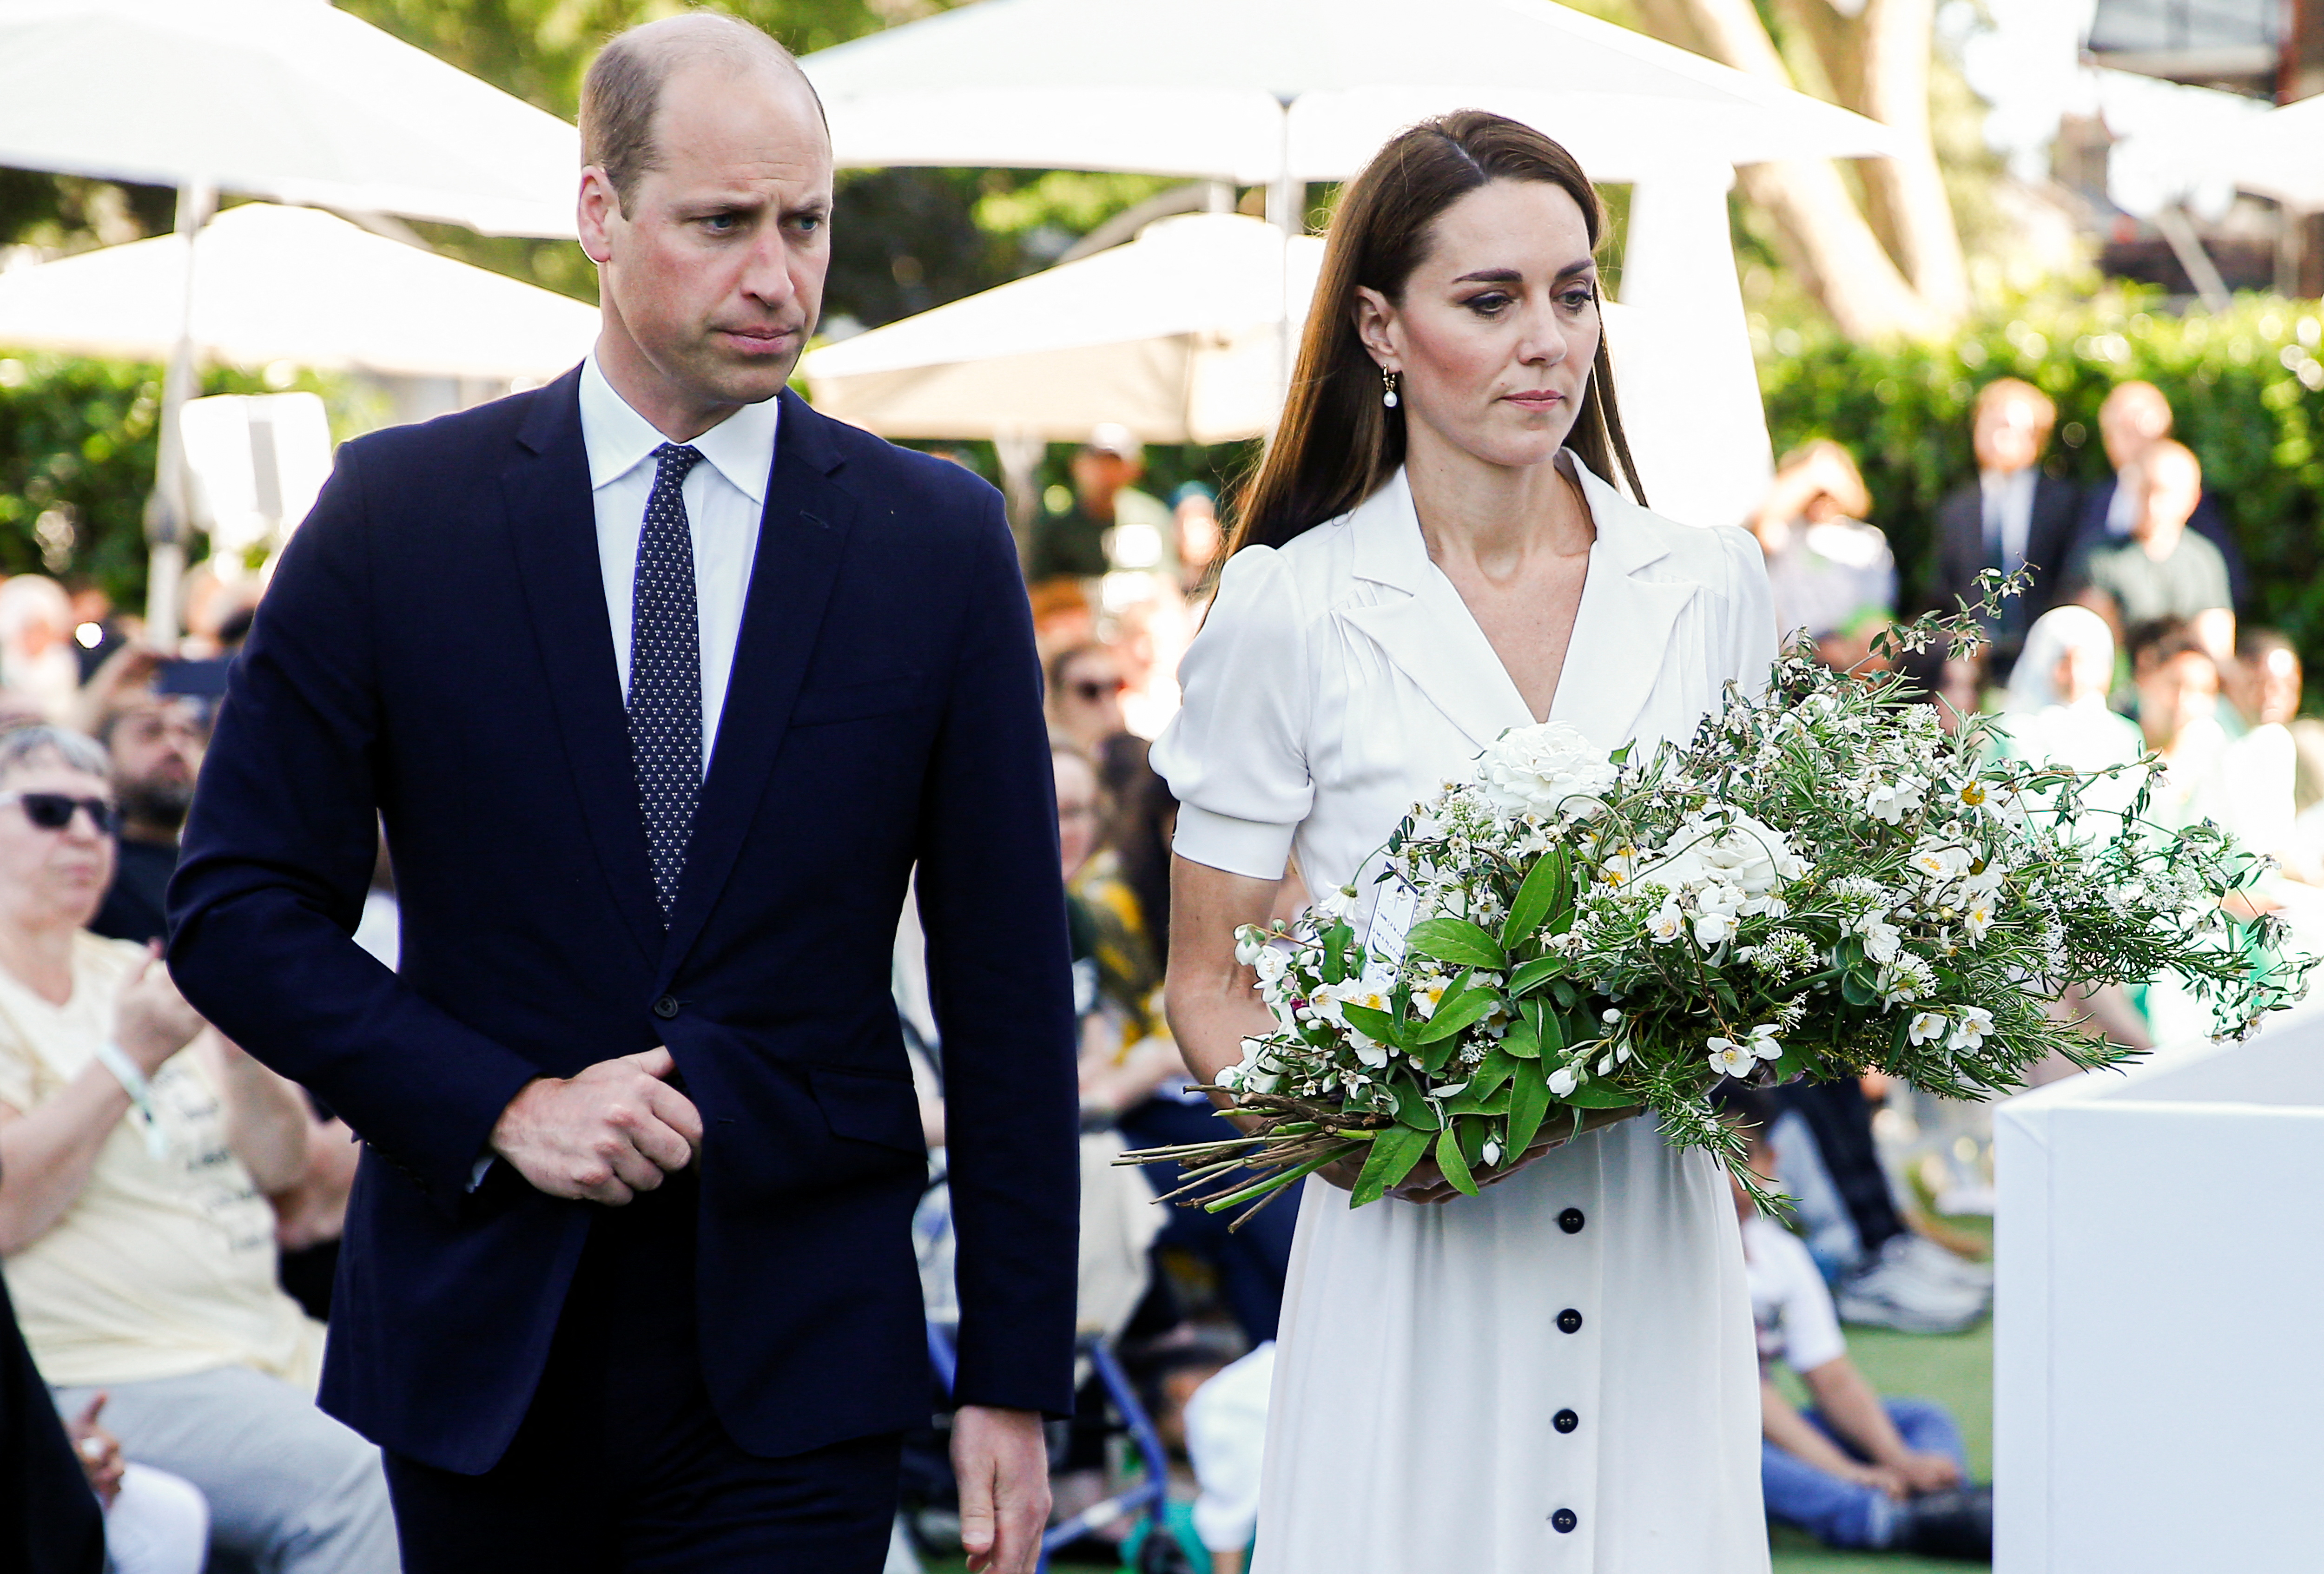 William, Prince of Wales and Catherine, Princess of Wales attend Grenfell Tower's 5th Memorial Service on June 14, 2022 in London, England | Source: Getty Images